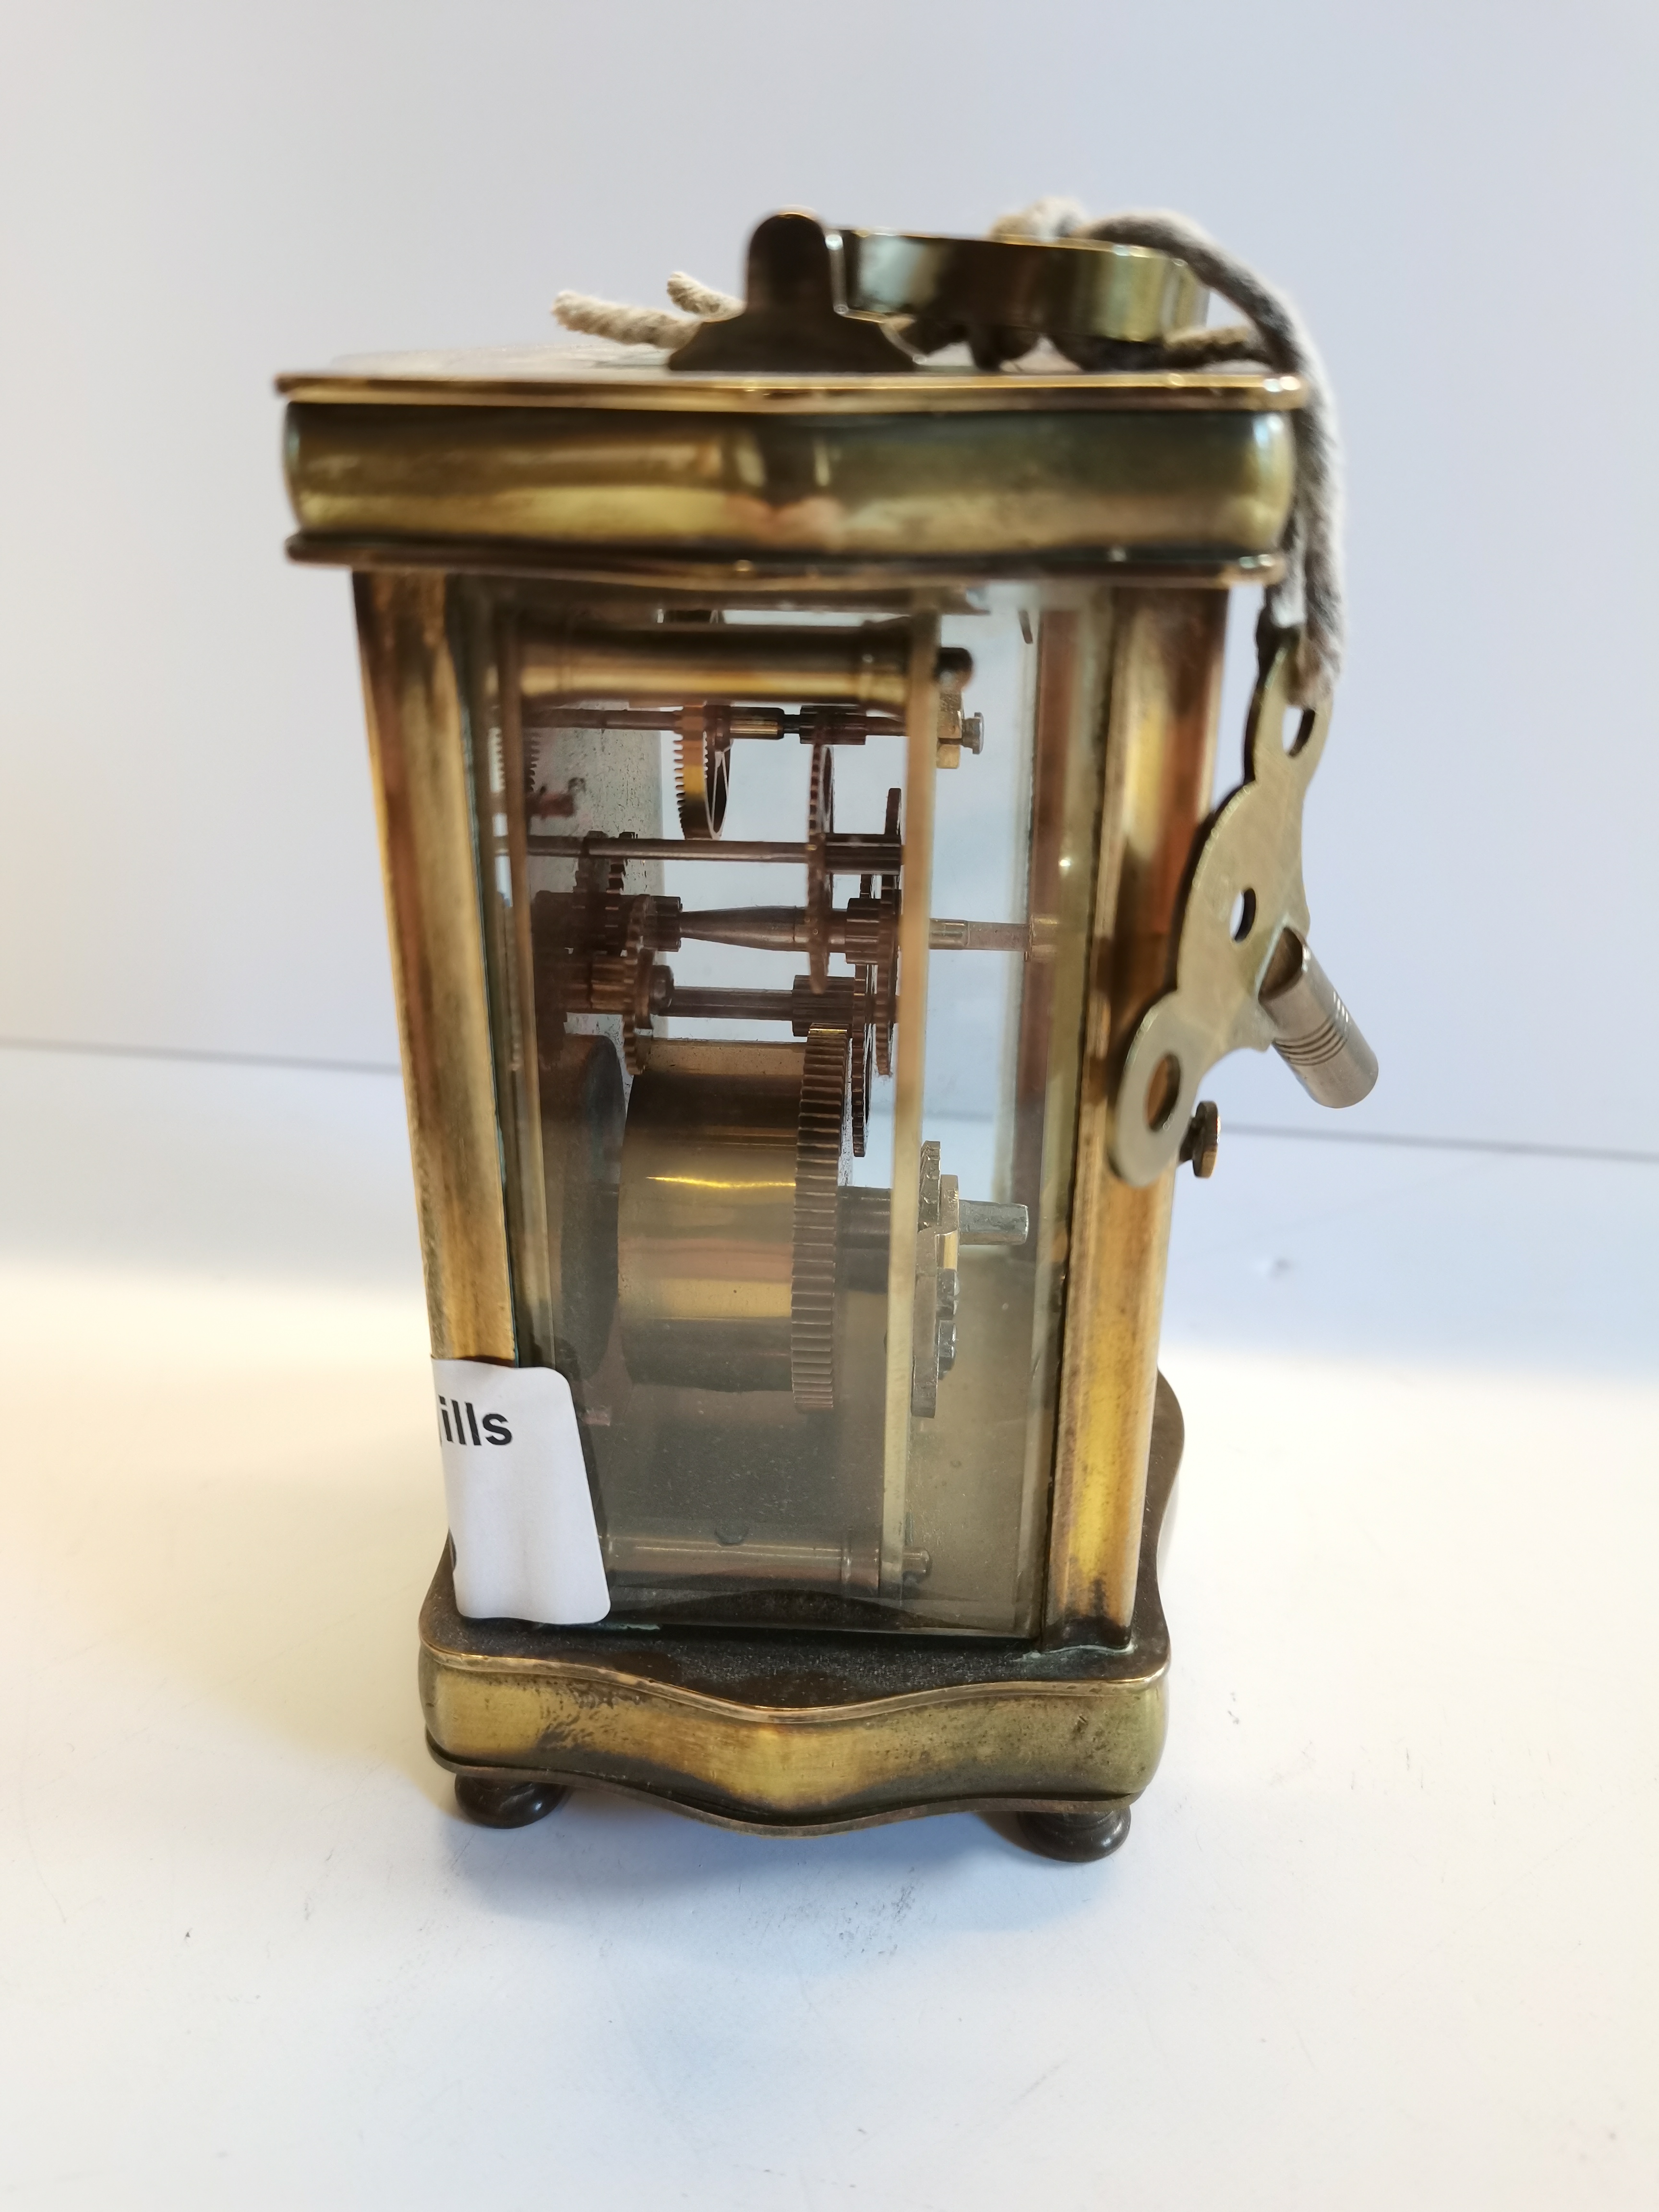 Small Brass carriage clock with key 7.5cm x 12cm - Image 2 of 2